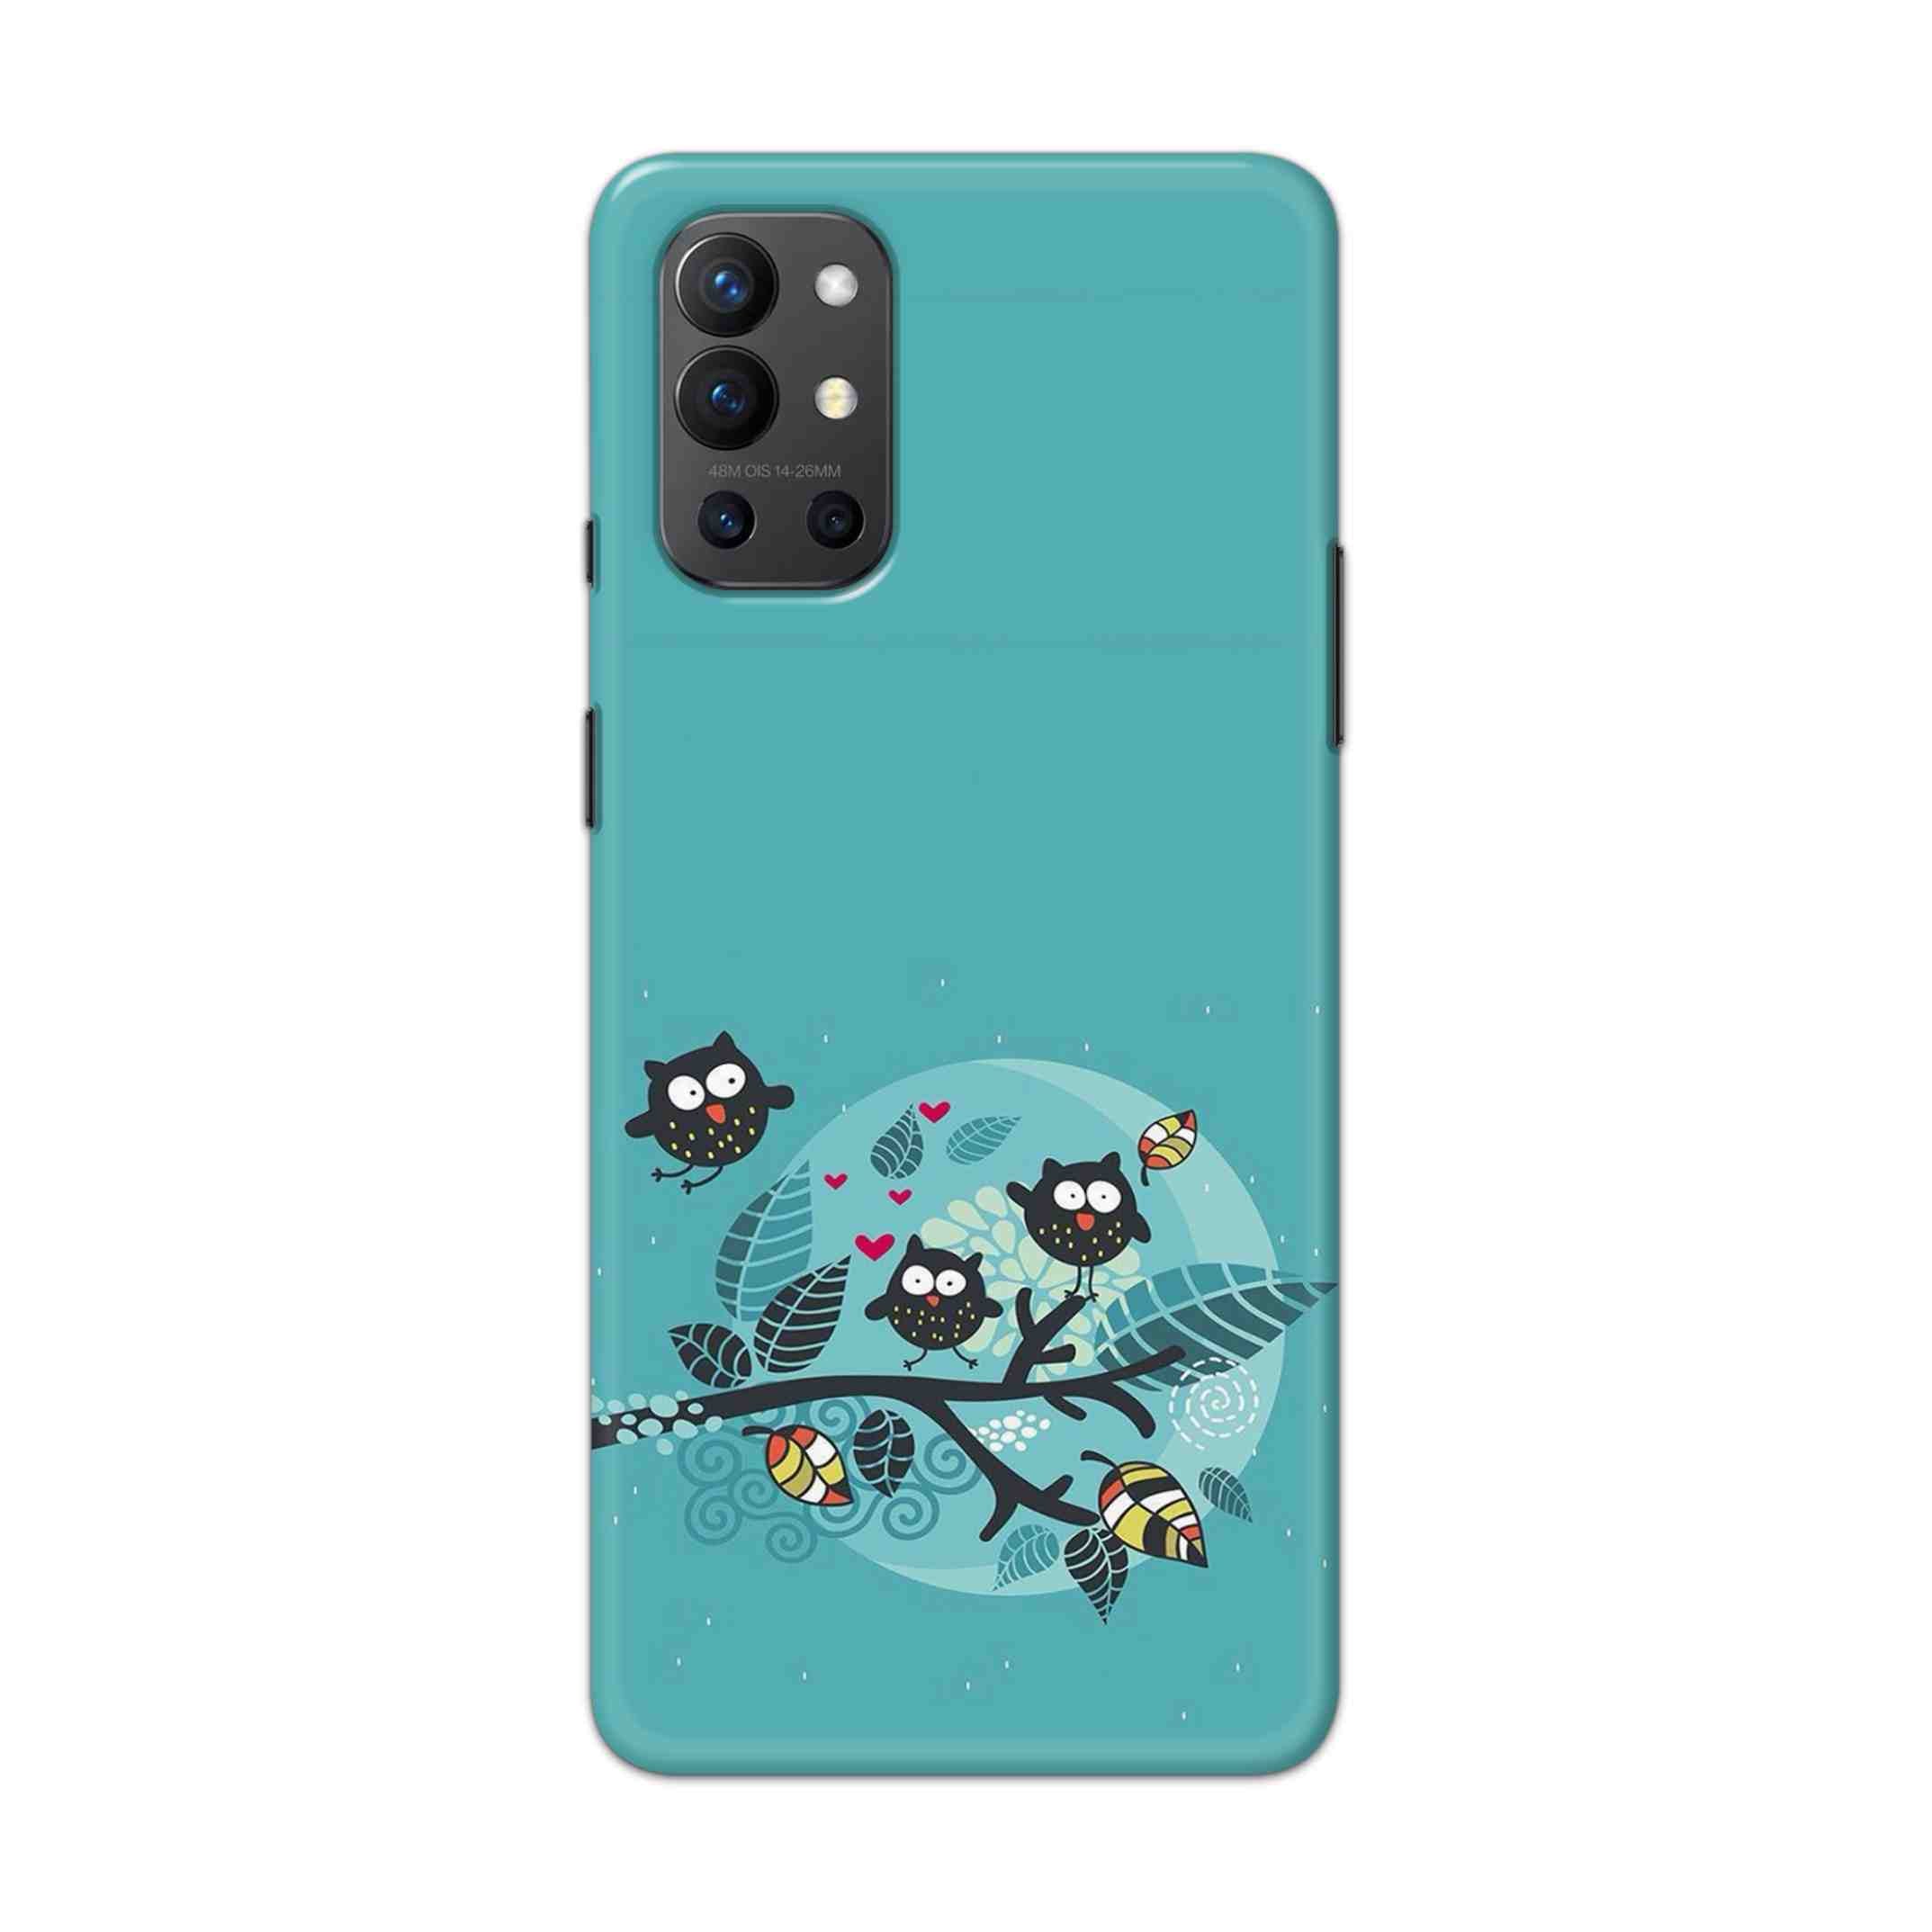 Buy Owl Hard Back Mobile Phone Case Cover For OnePlus 9R / 8T Online